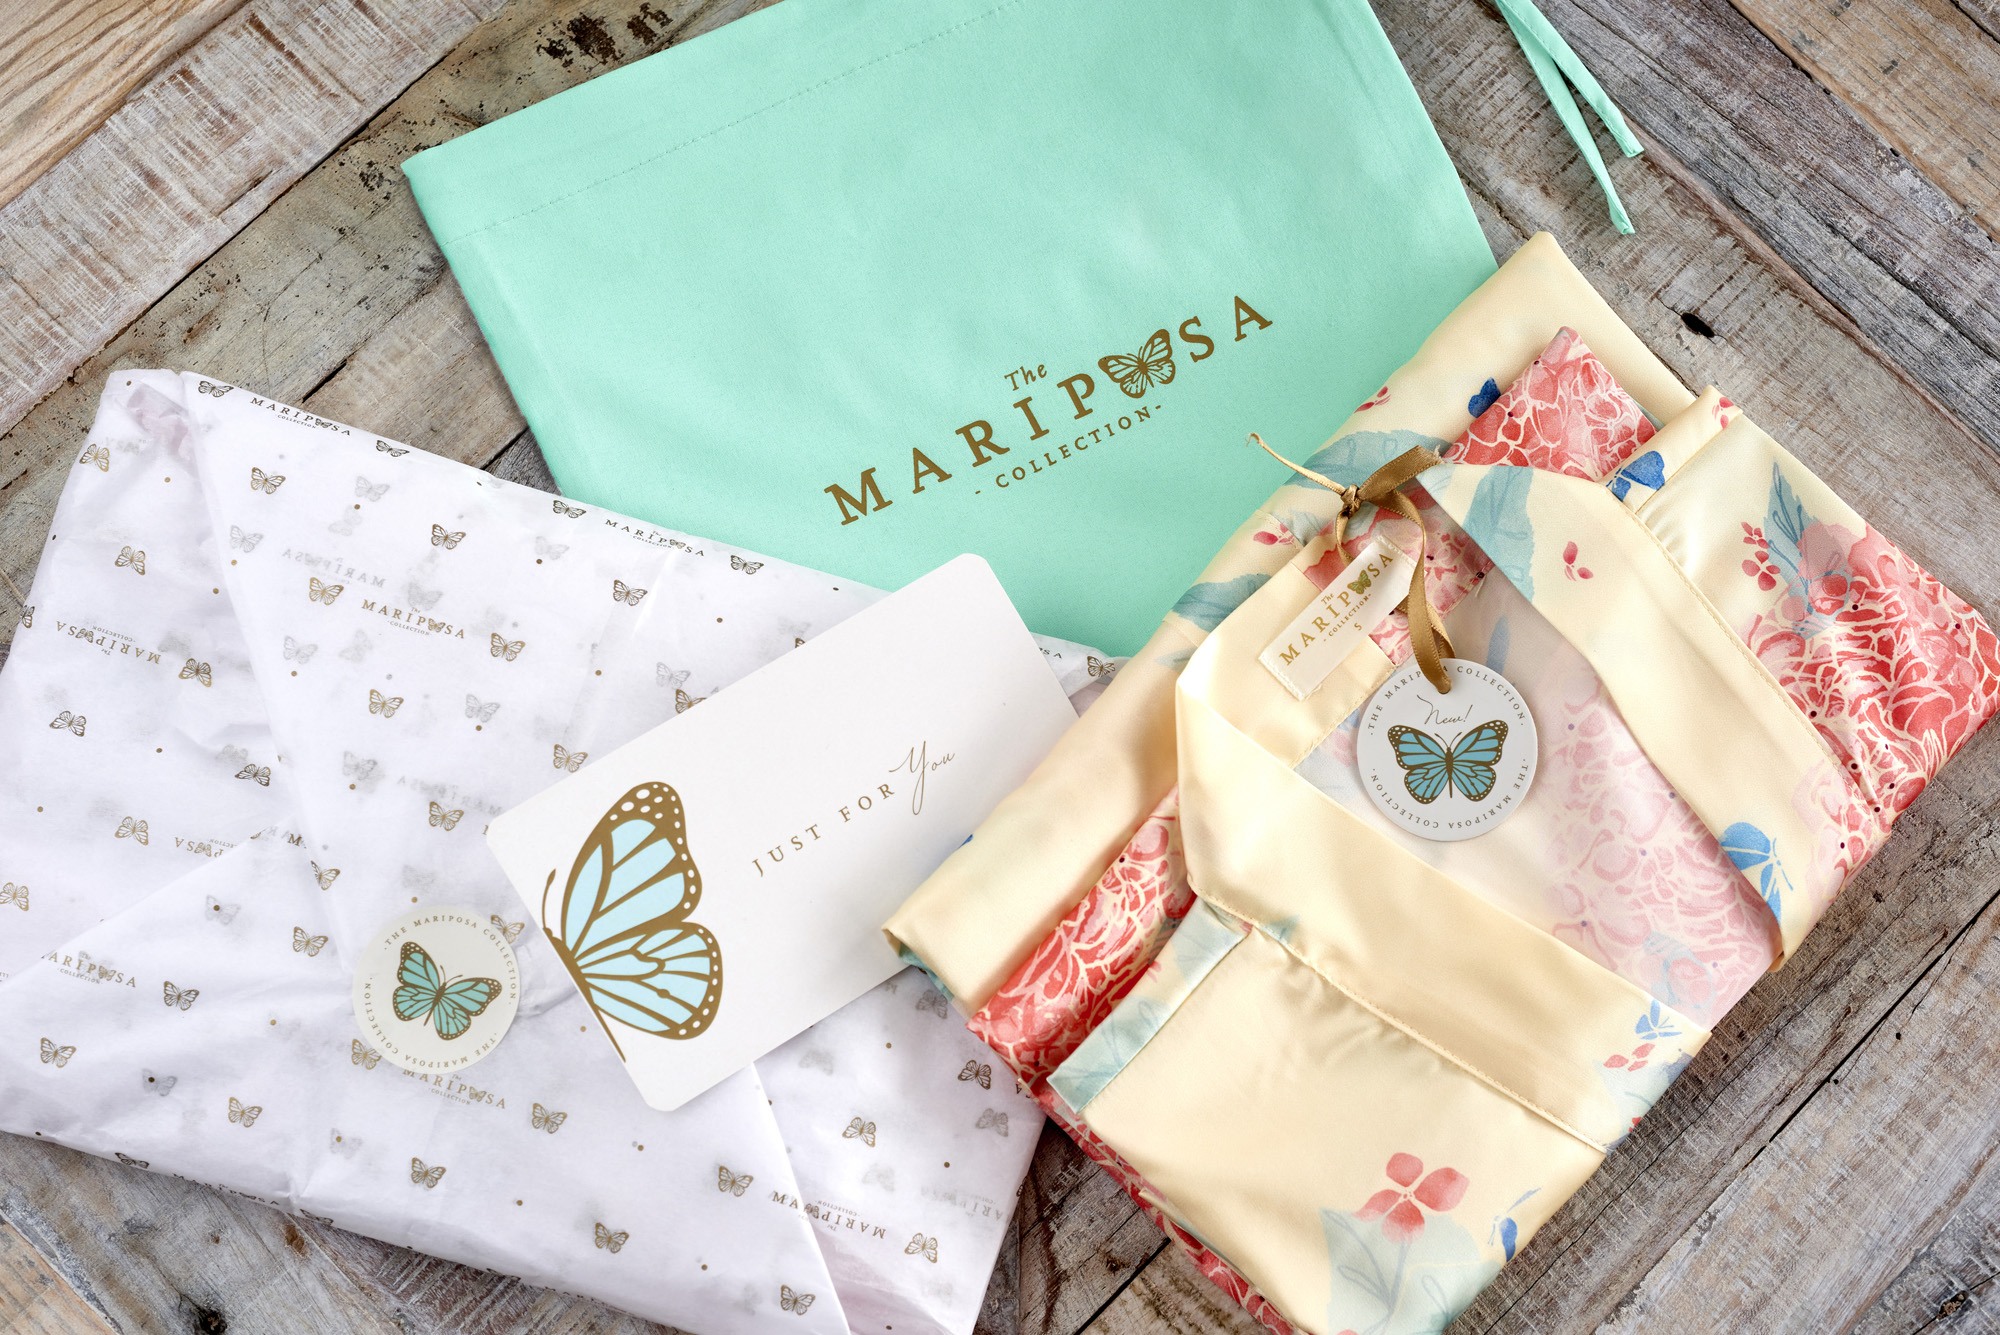 The Mariposa Collection